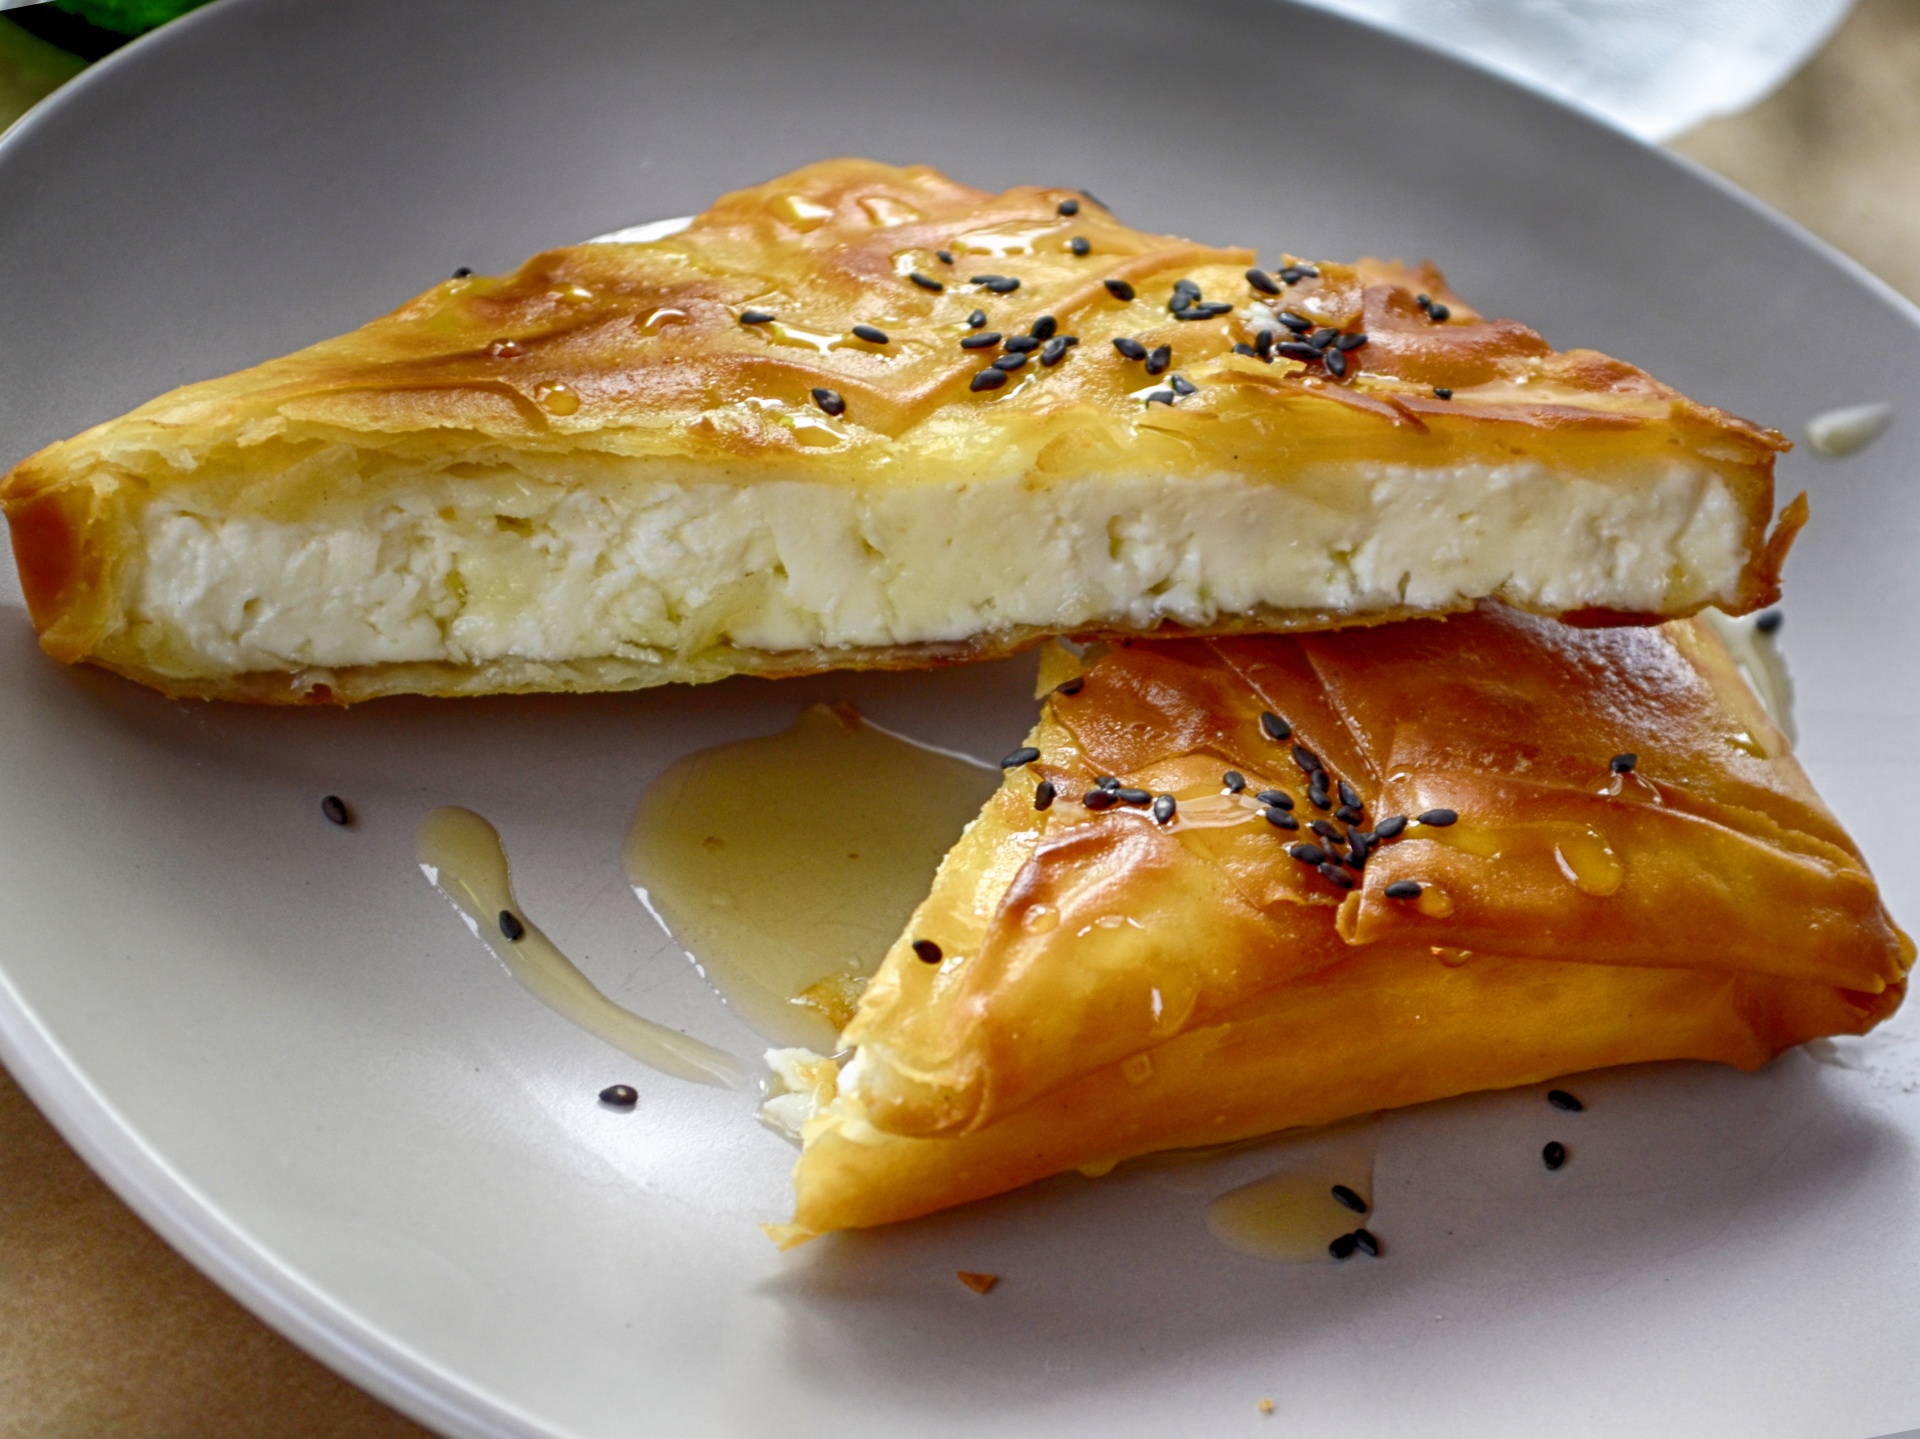 Baked Brie and Red Pepper Jelly Wrapped in Phyllo Pastry